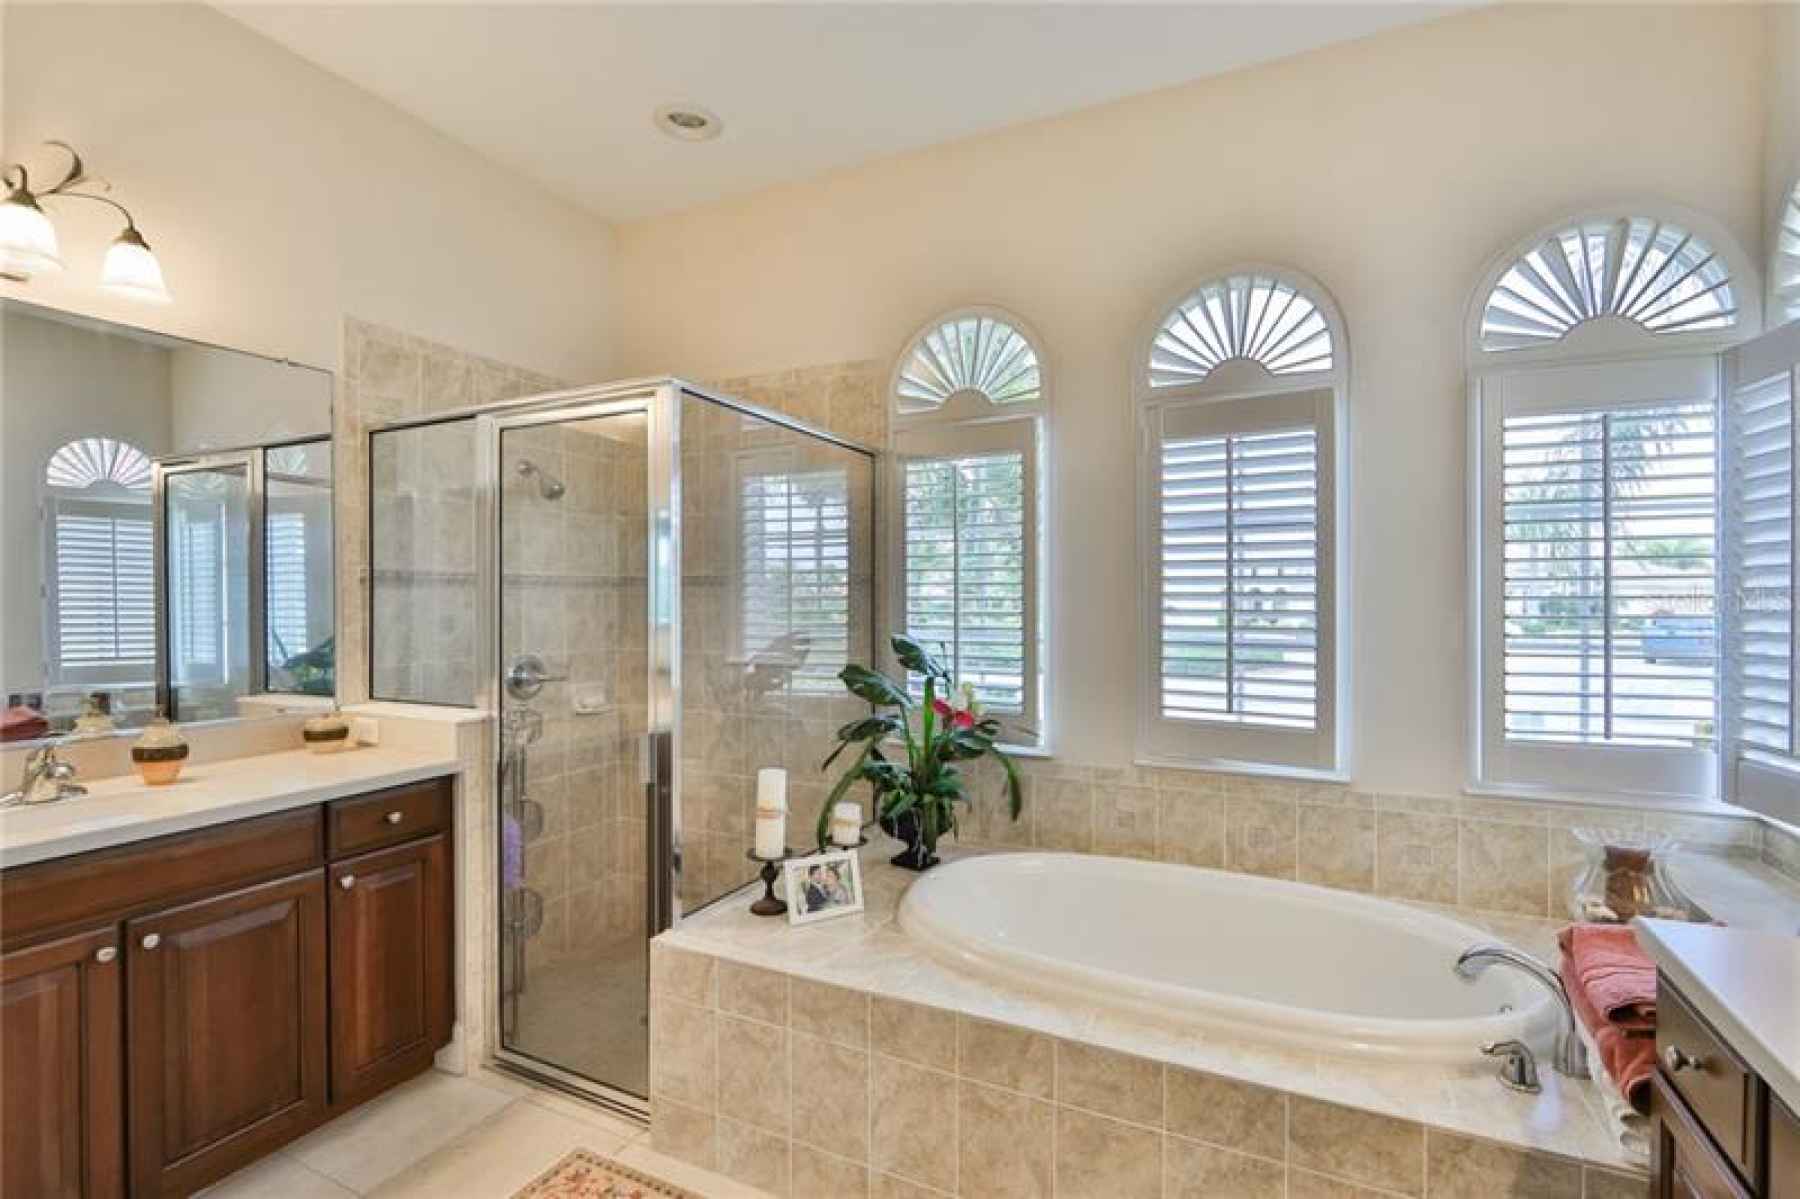 Brightly lit and spacious, this Master bathroom is simple elegance.